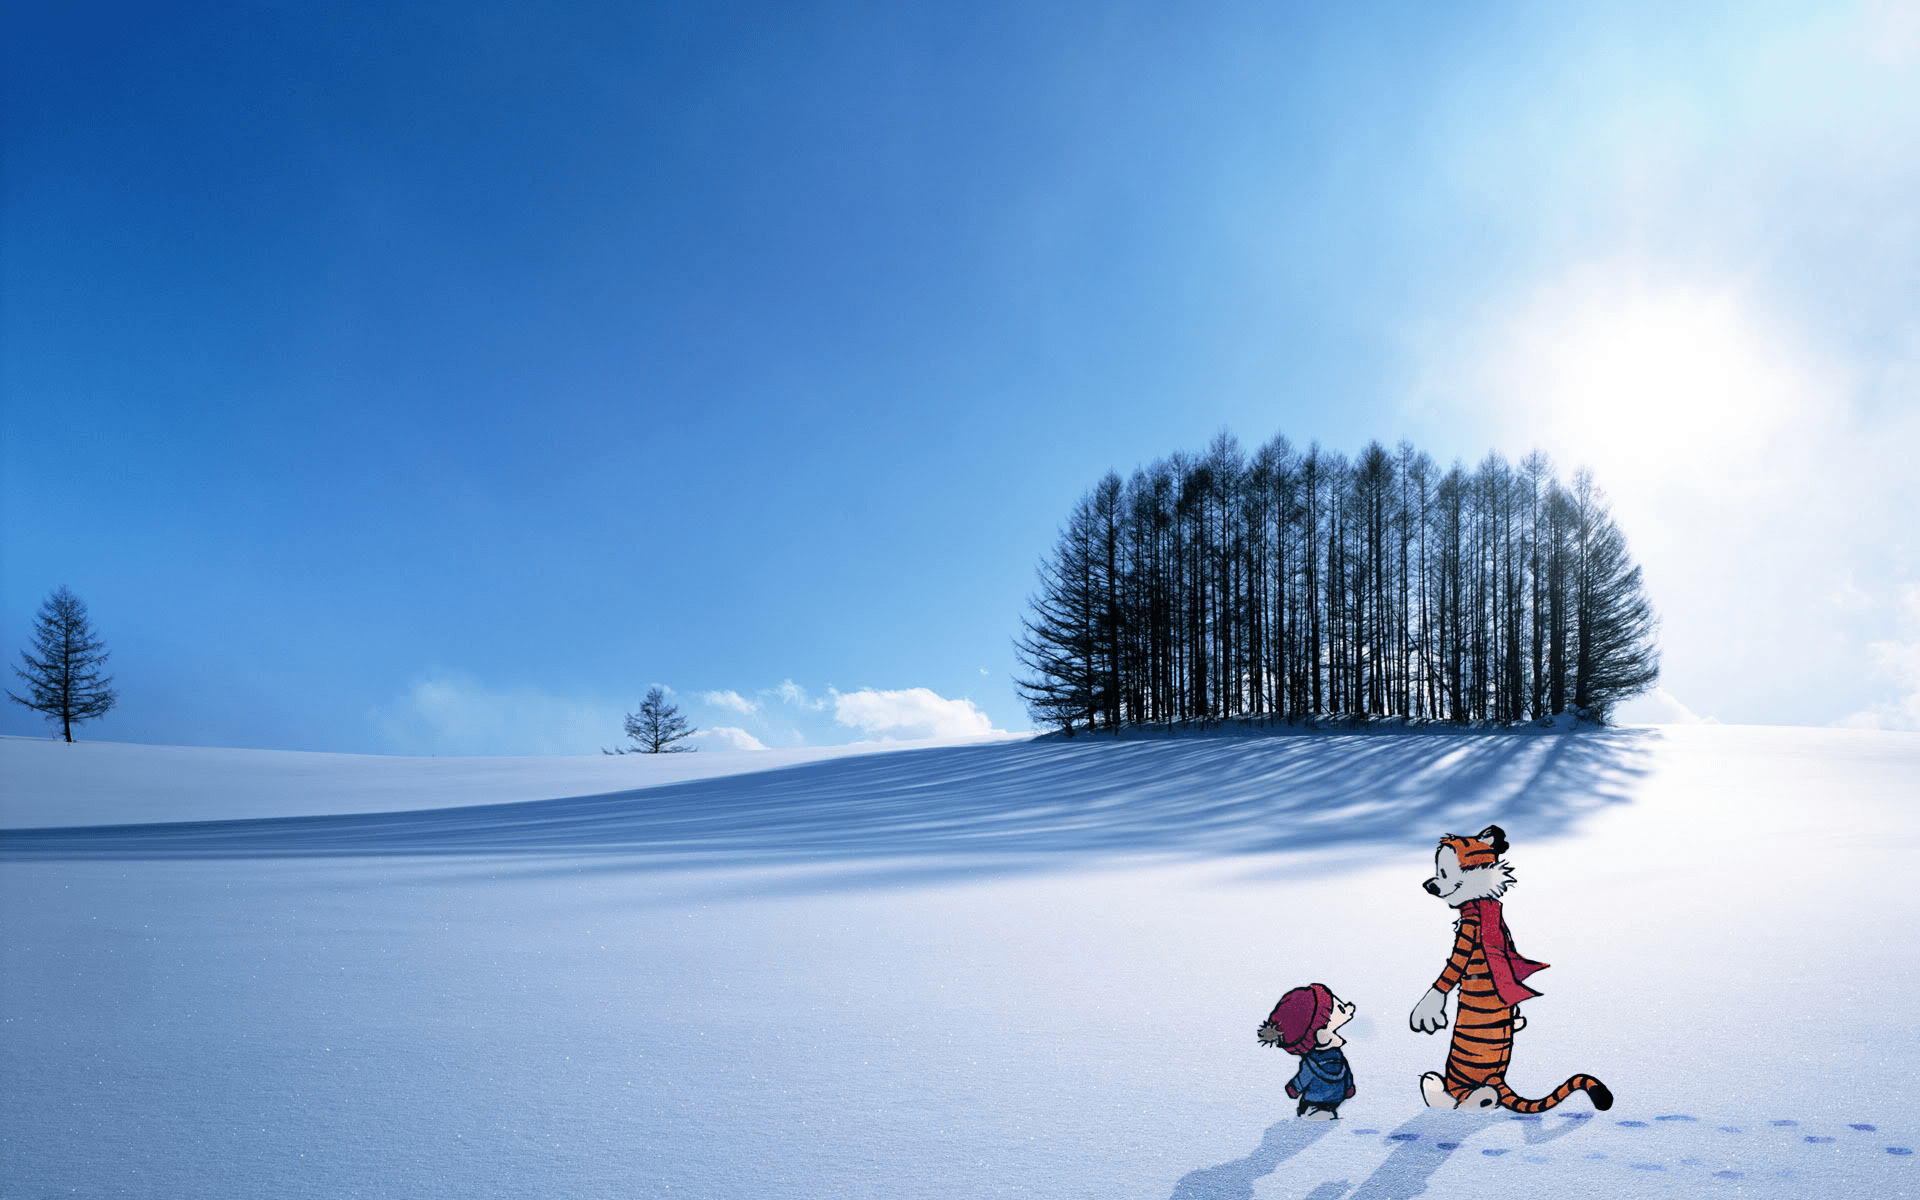 OC) Calvin and Hobbes in a remote snow field